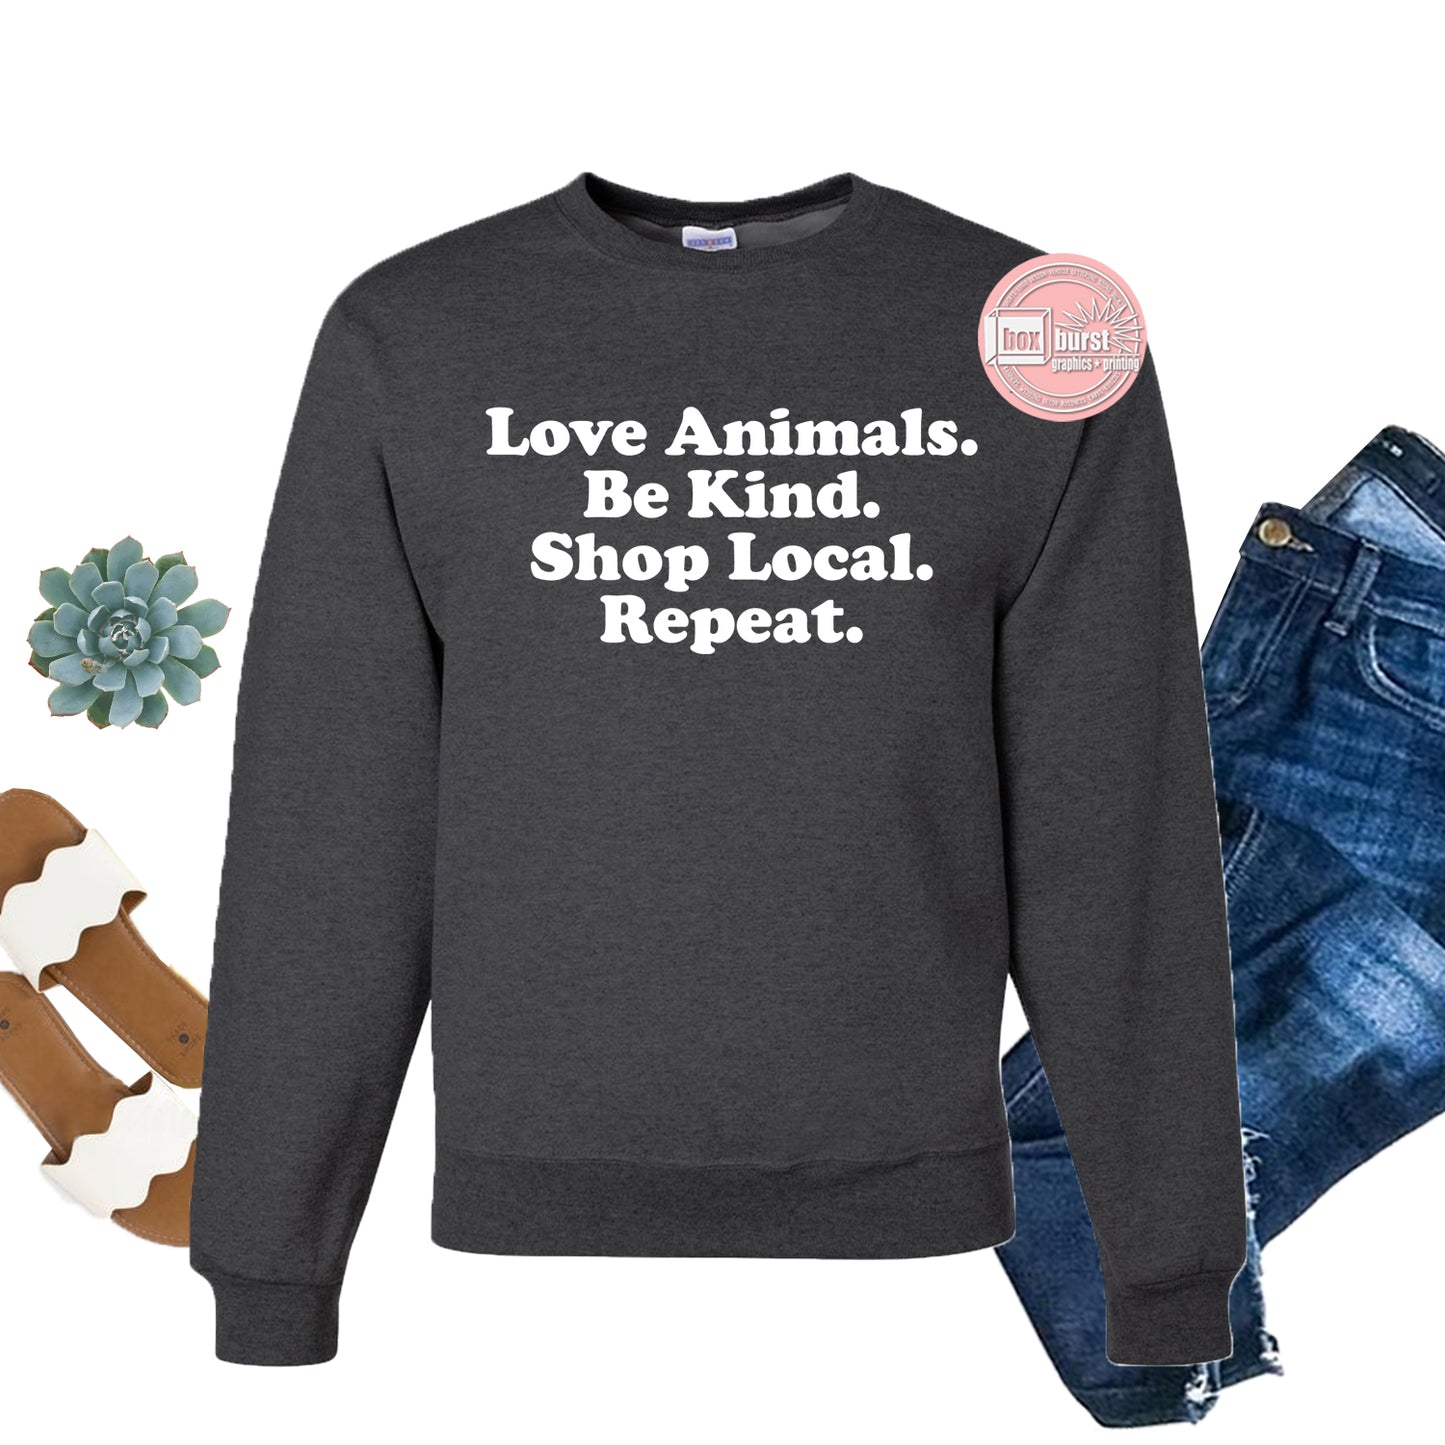 Love animals, Be Kind, Shop Local, Repeat unsiex crew neck sweater SOM